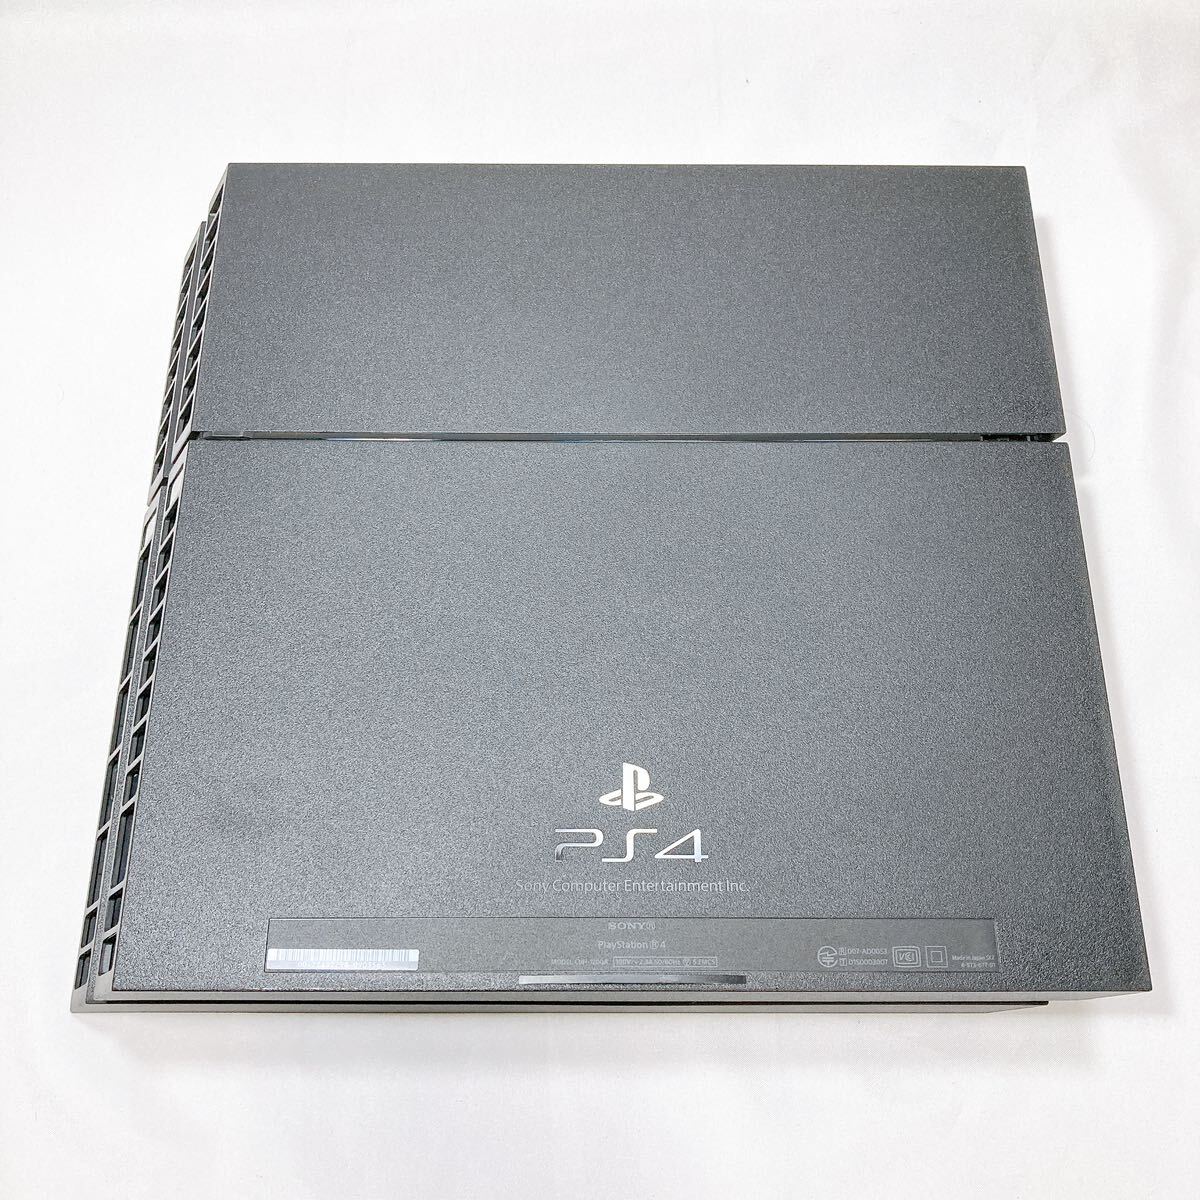 SONY PS4 CUH-1200A 500GB jet black body only box attaching / Sony PlayStation 4 PlayStation4 PlayStation 4 the first period . operation verification ending 